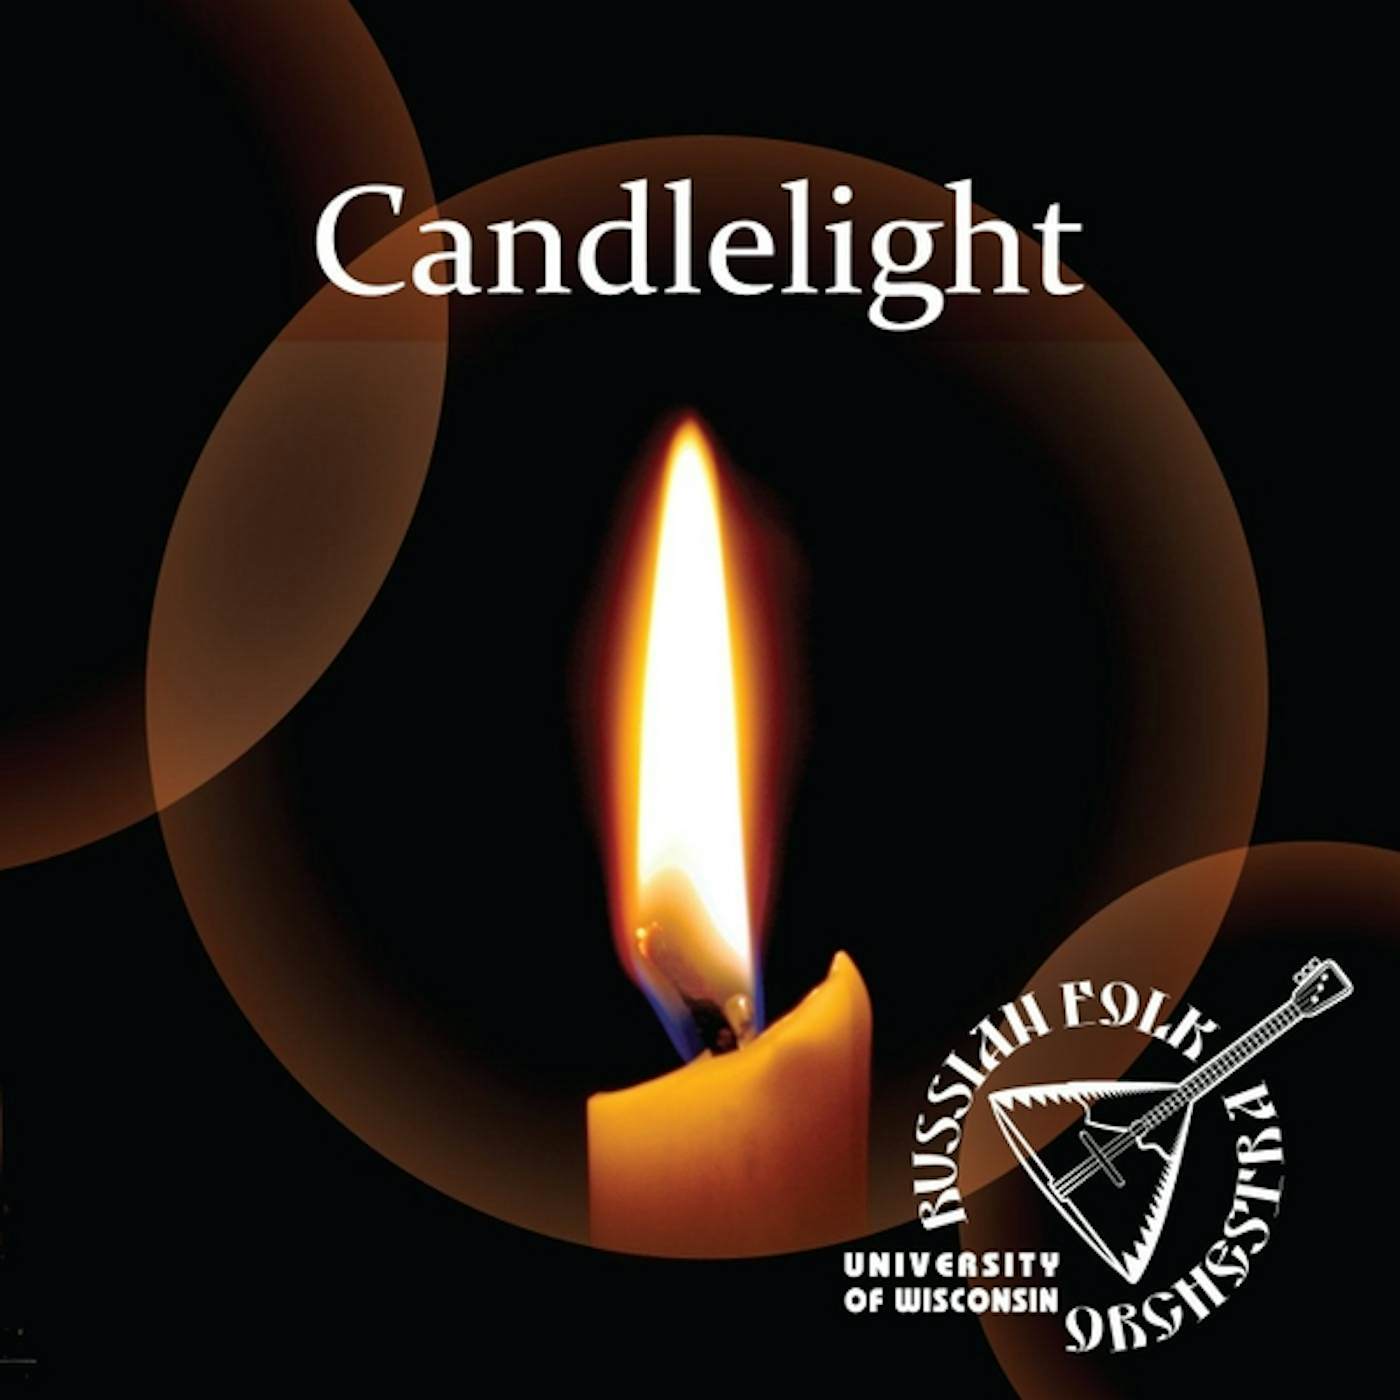 University Of Wisconsin Russian Folk Orchestra CANDLELIGHT CD